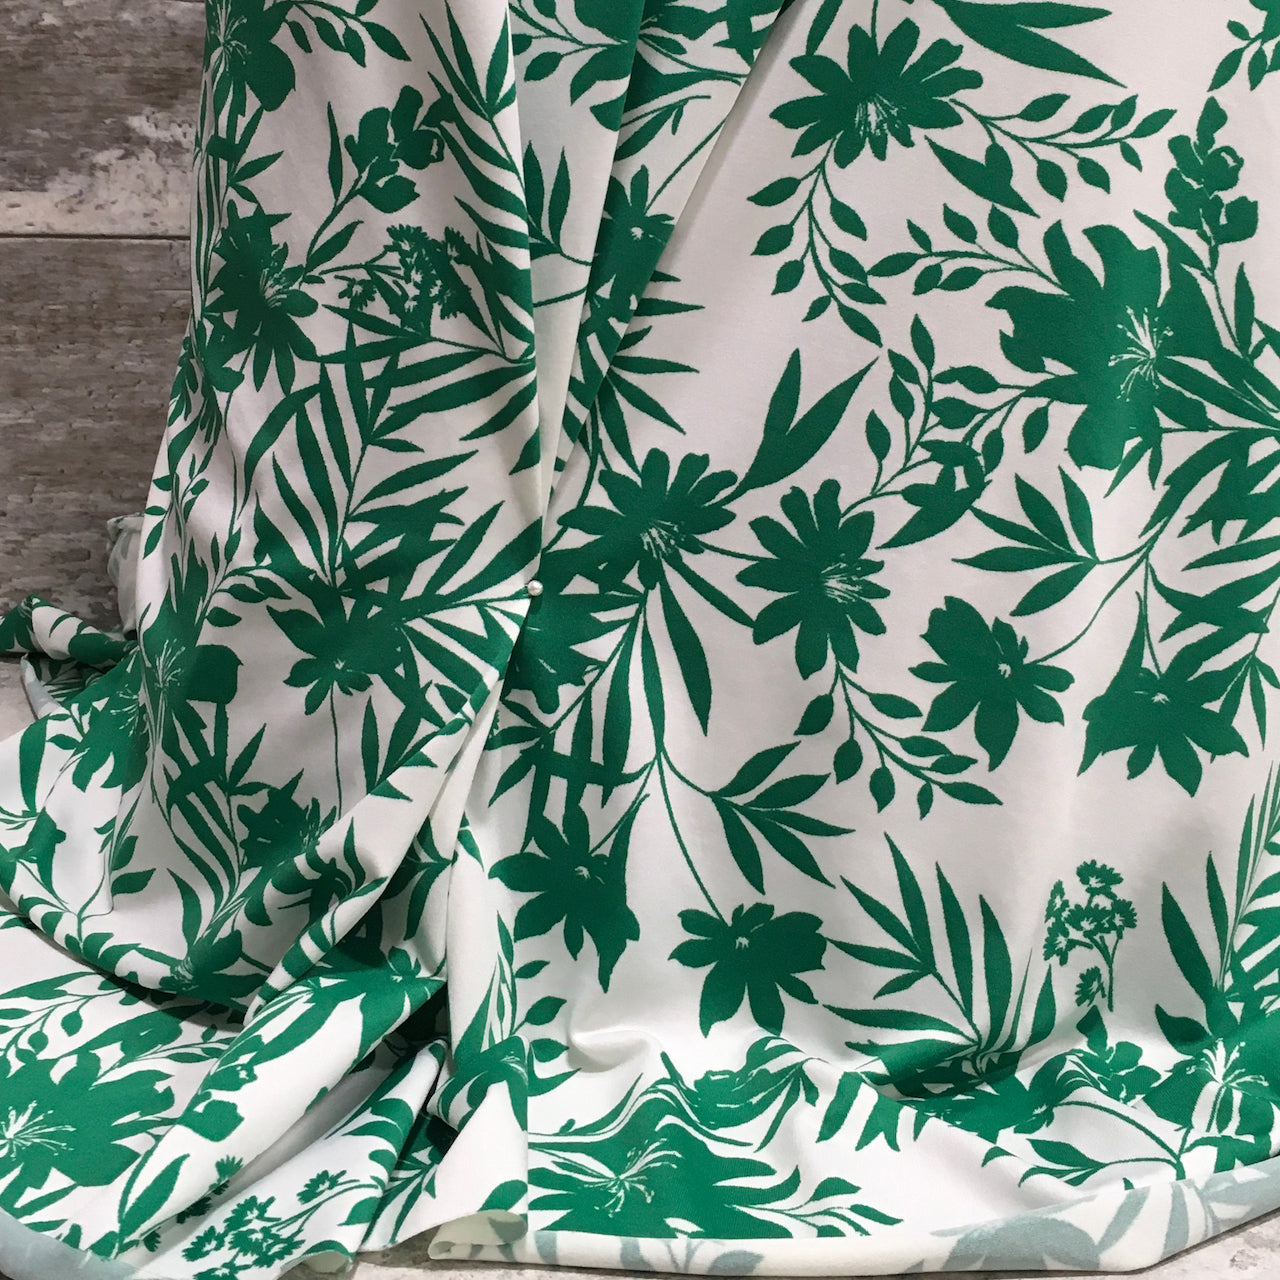 Swimwear / Green Floral - Sold by the half yard